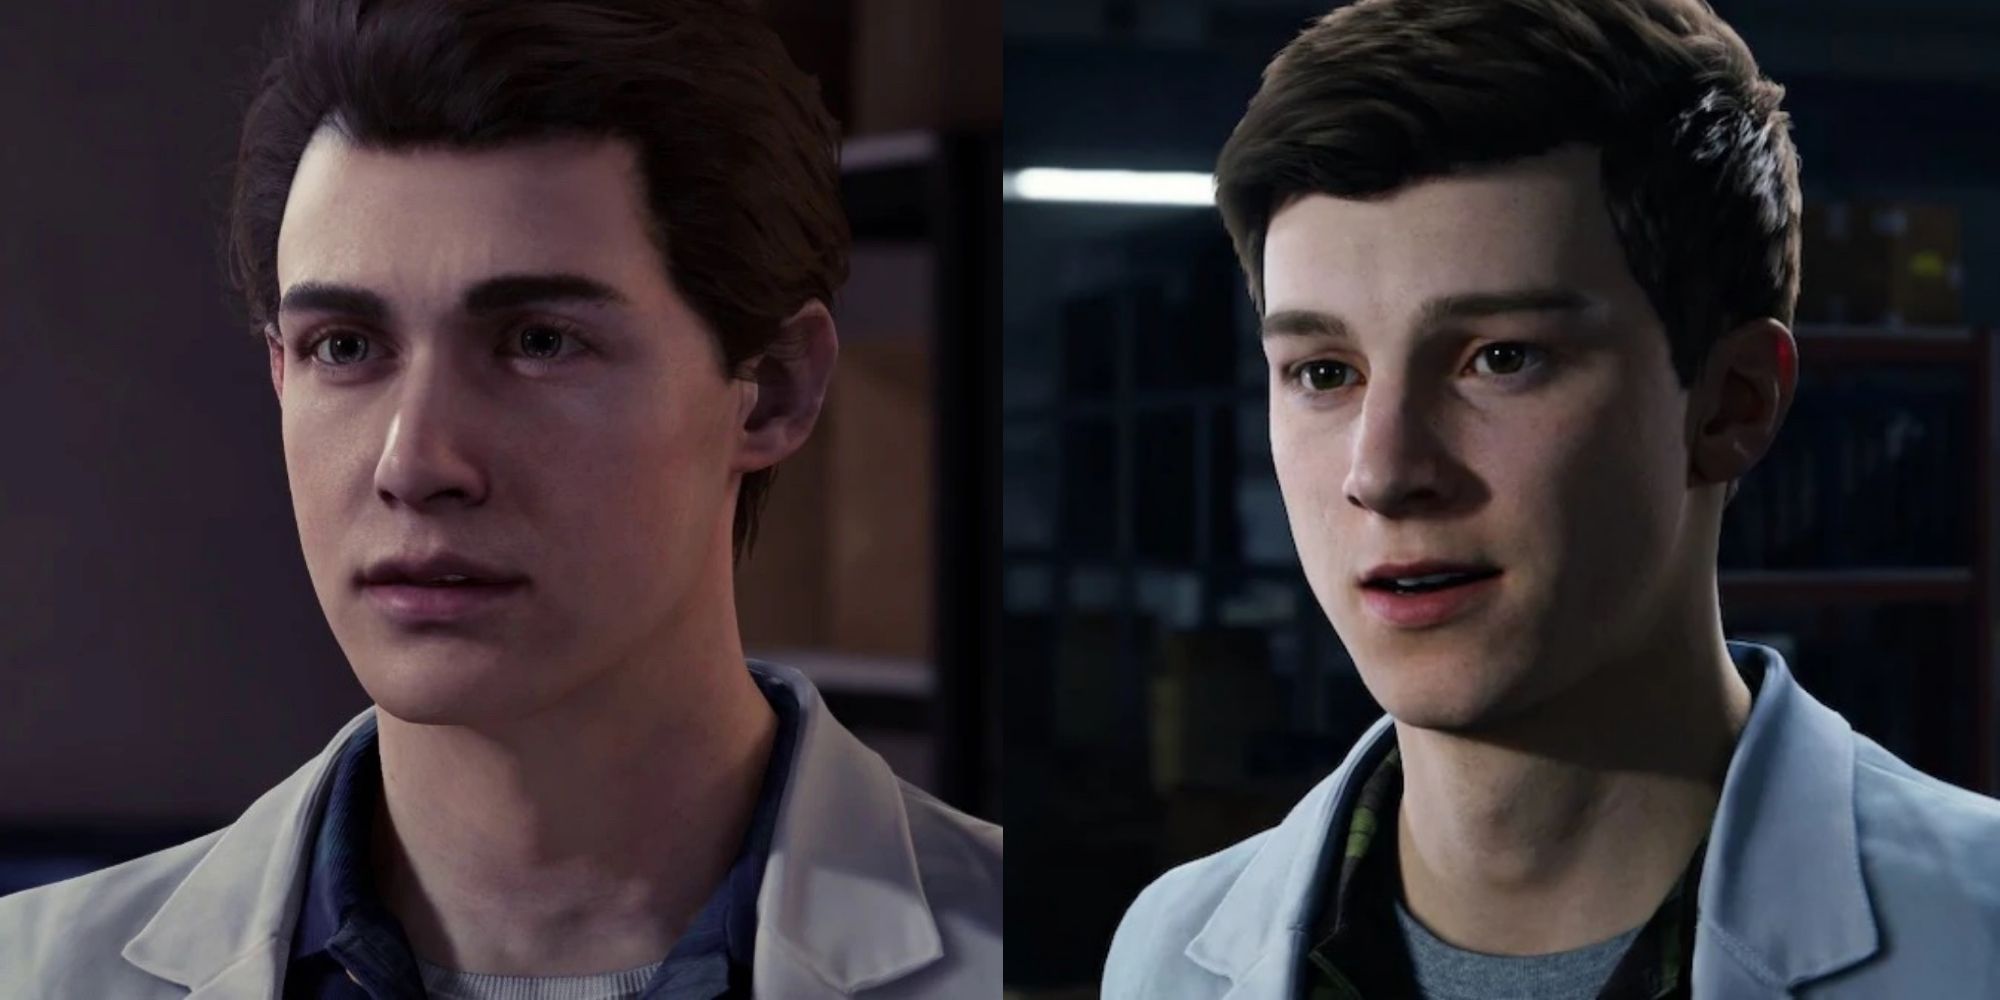 A side-by-side comparison between Peter Parker from Marvel's Spider-Man for the PS4 and Peter Parker from Marvel's Spider-Man Remastered for the PS5